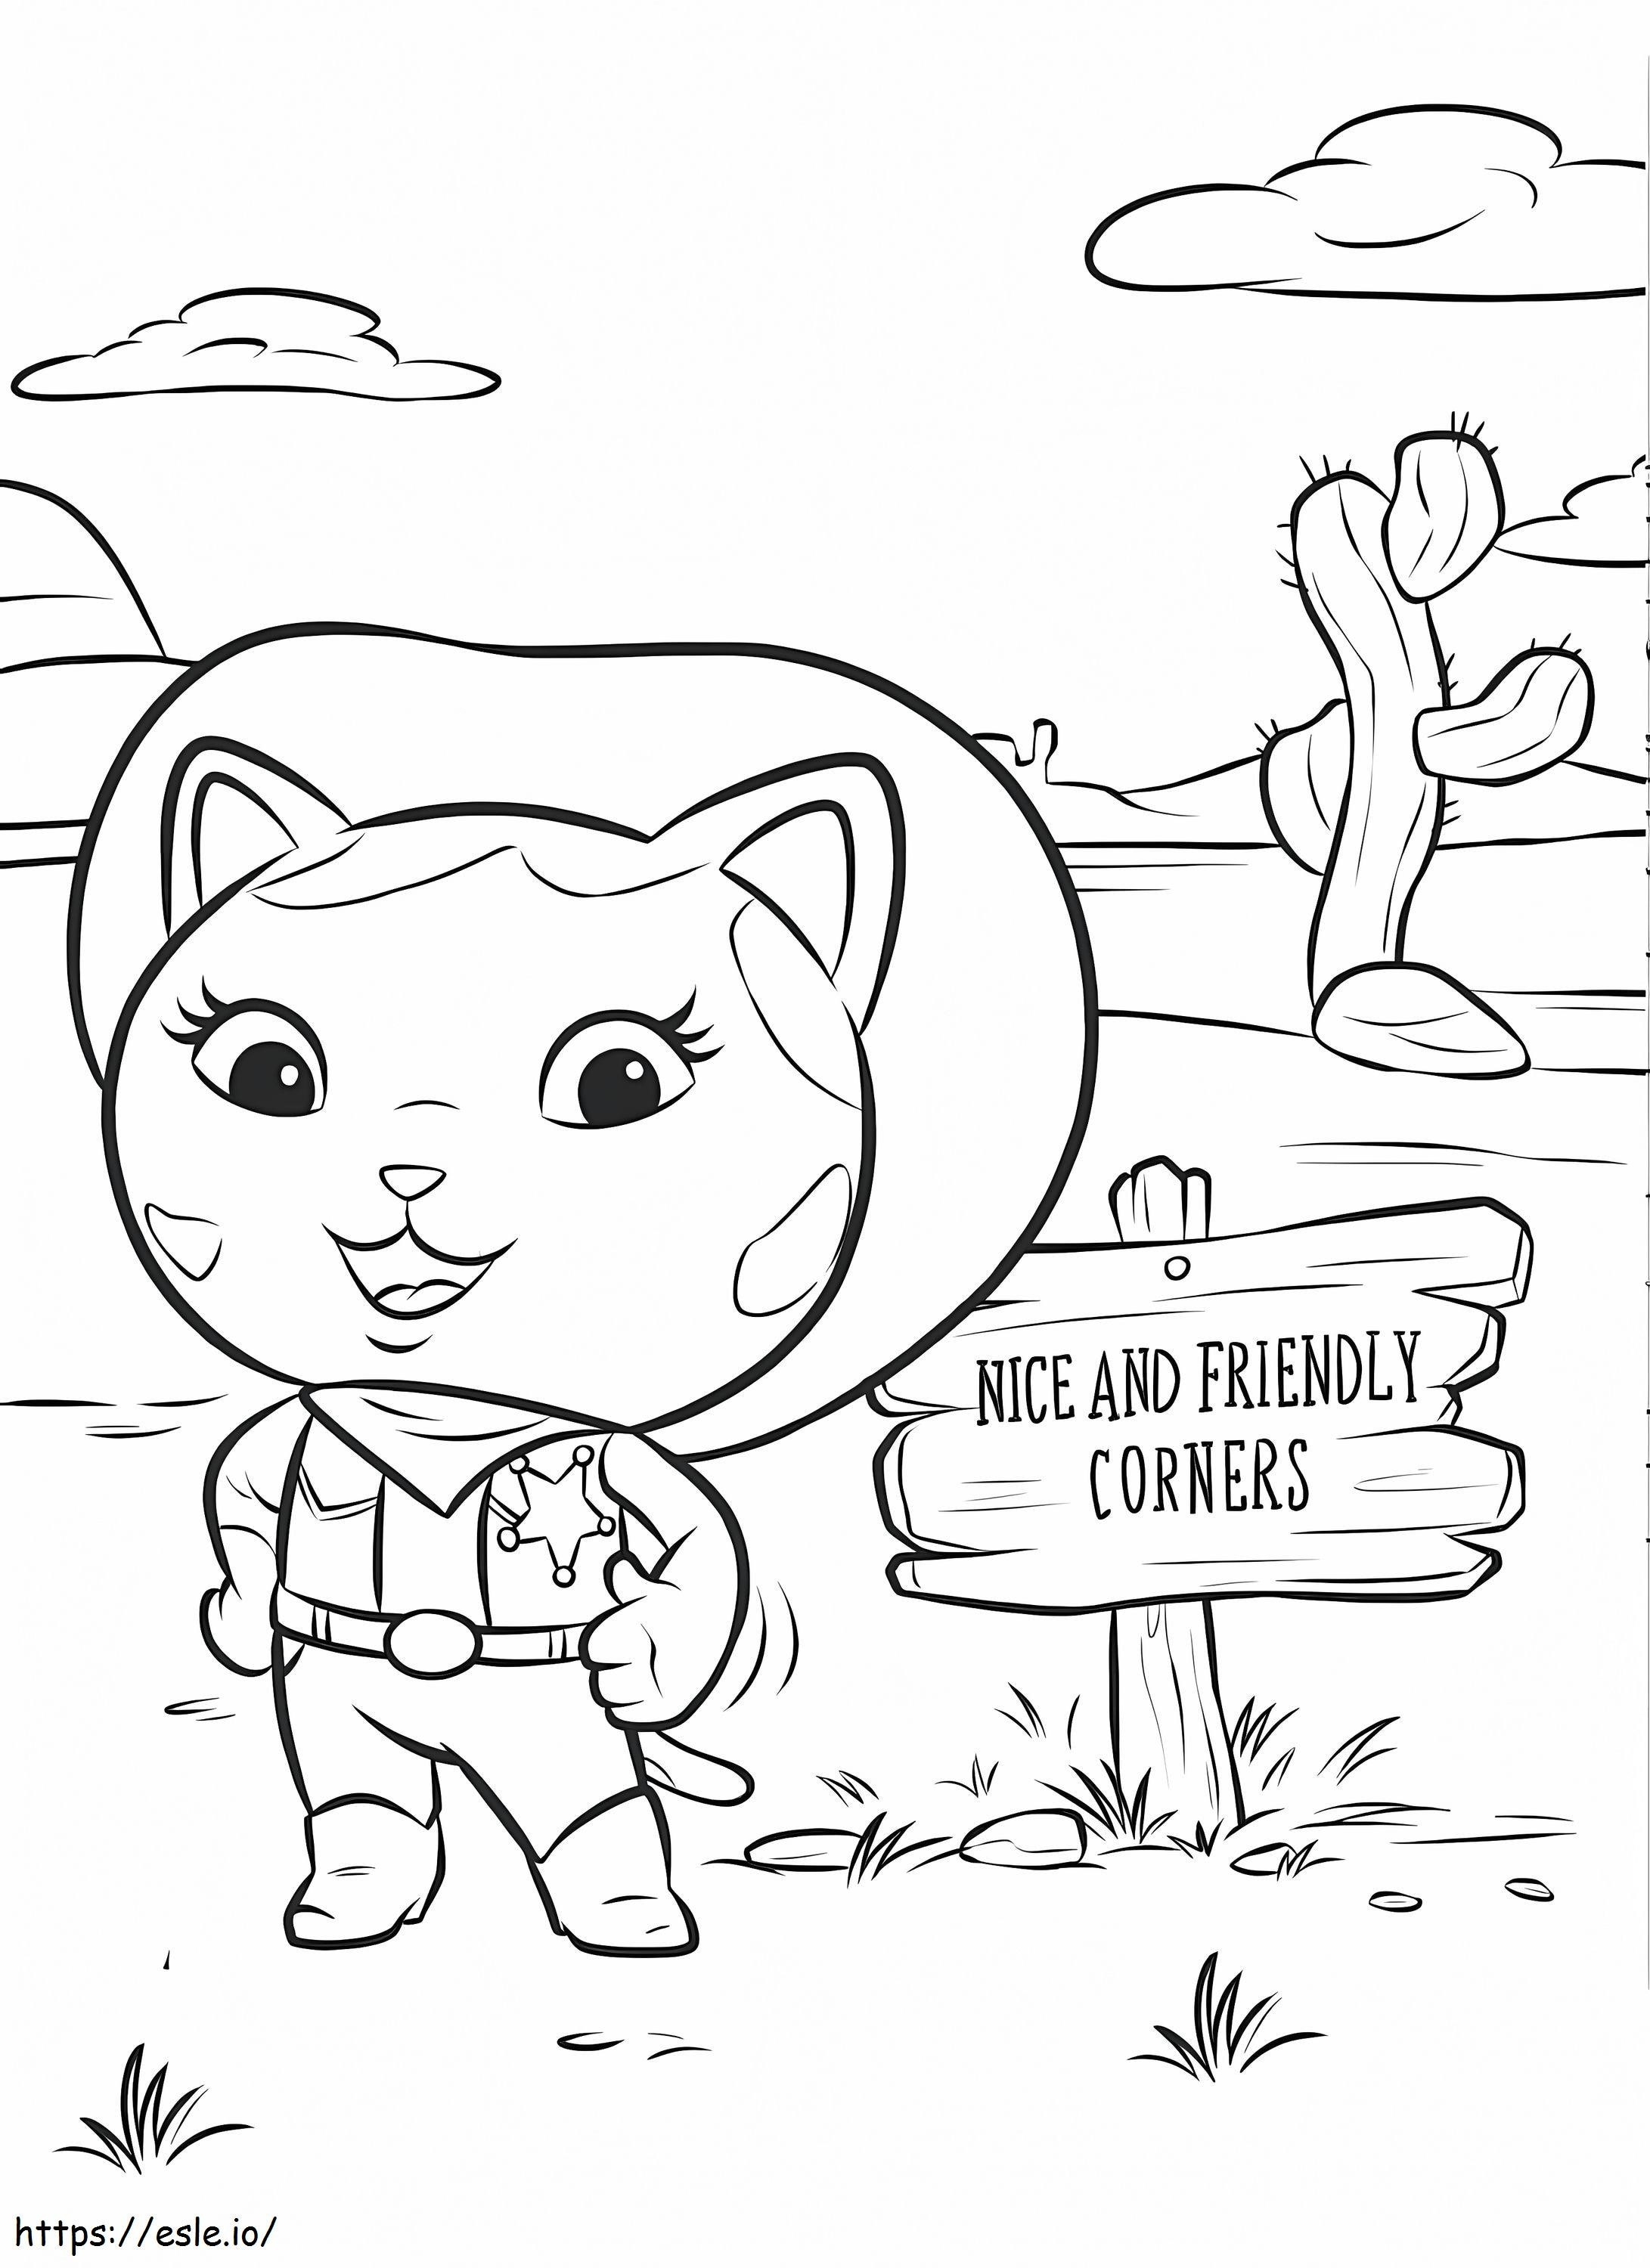 Happy Sheriff Callie coloring page